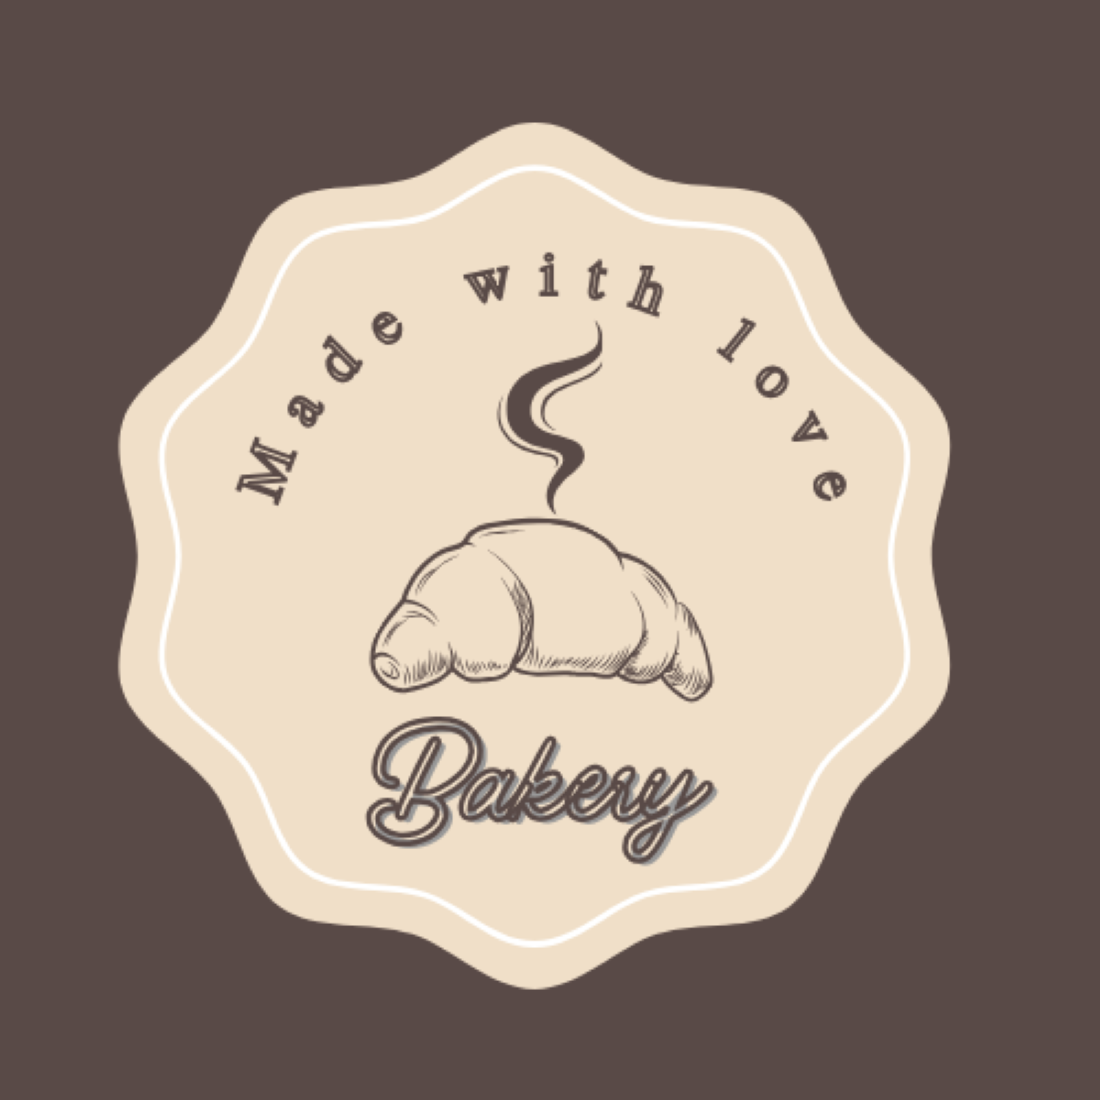 Bakery logo preview image.